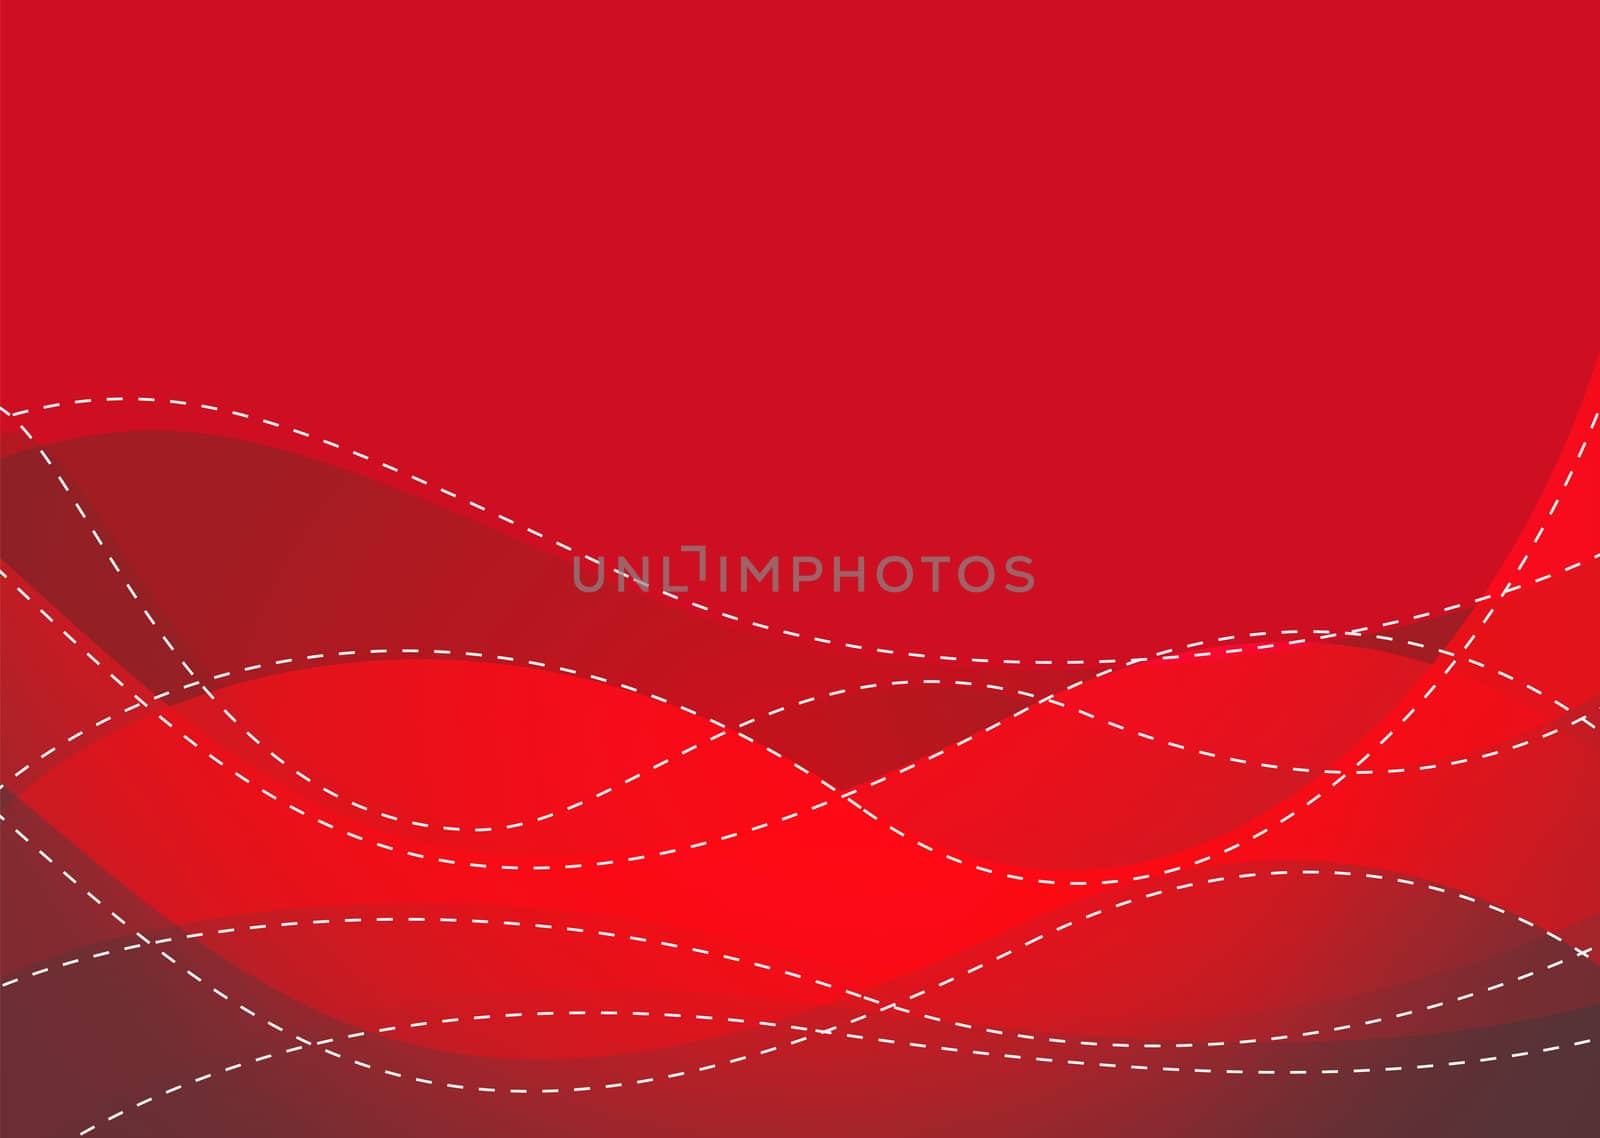 Abstract red and maroon ocean wave background with dotted line